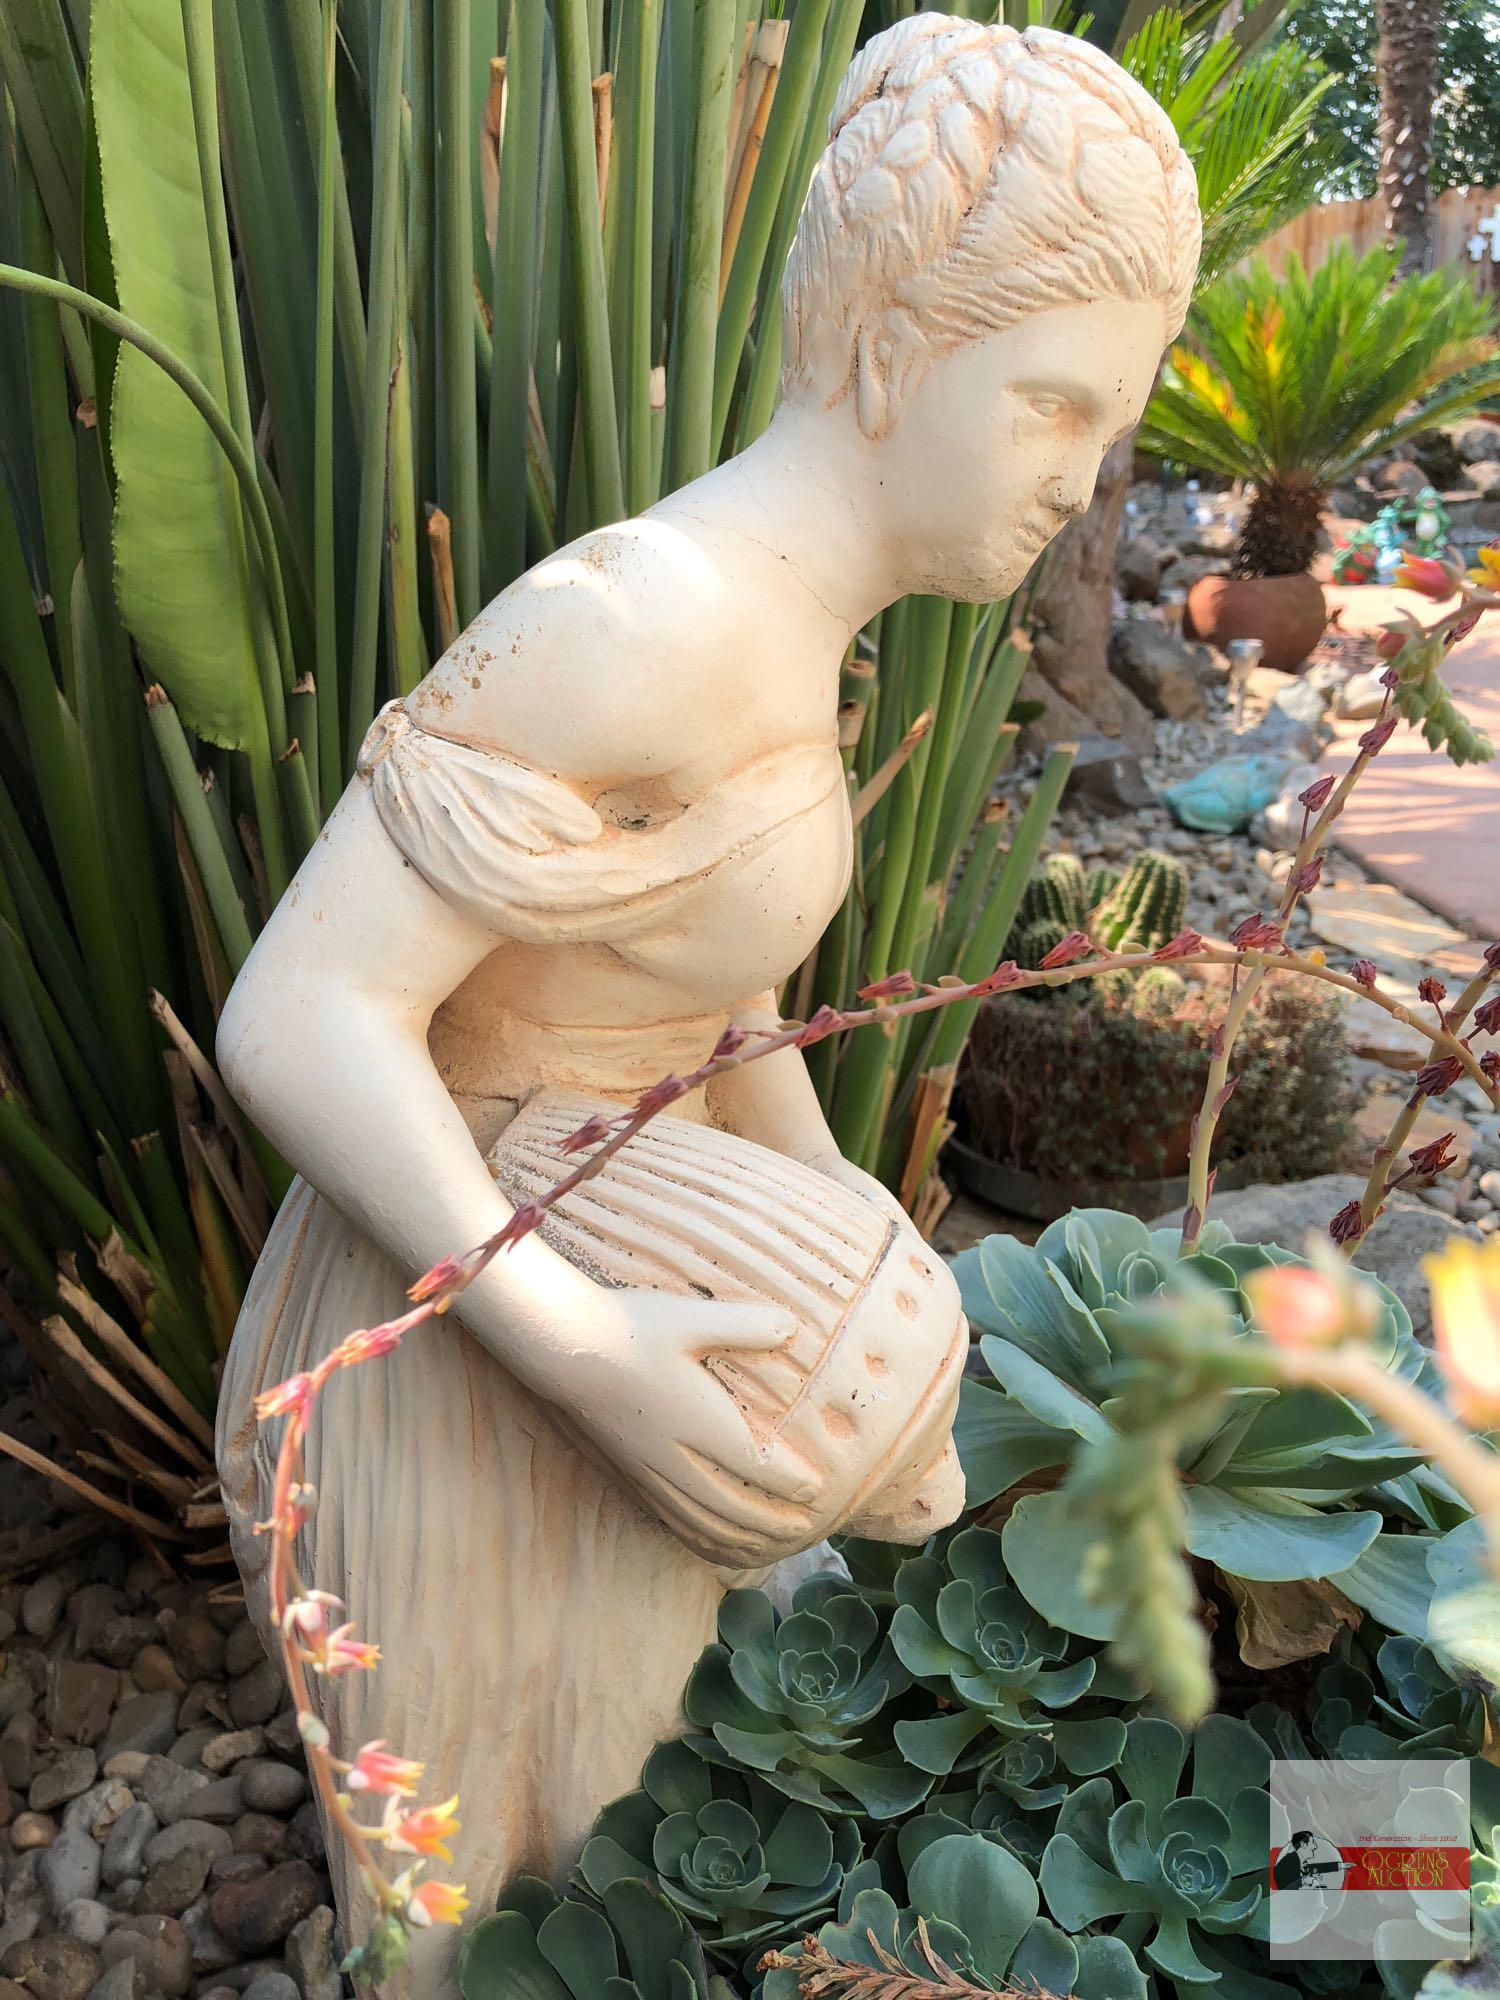 Yard & Garden - Woman w/urn statuary planter, potted hens/chickens, 32"hx18"wx22"d, natural cracking